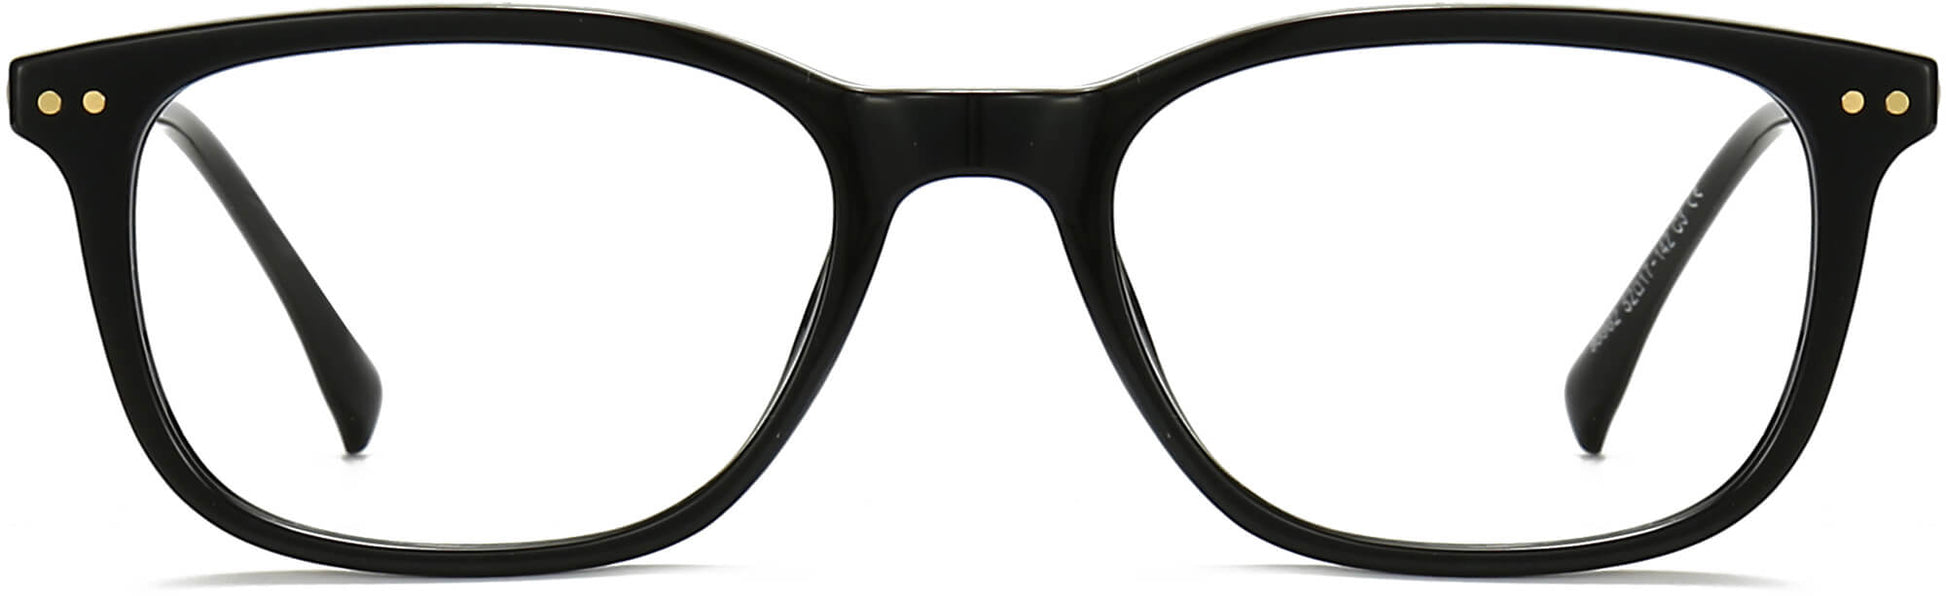 Tinsley Round Black Eyeglasses from ANRRI, front view